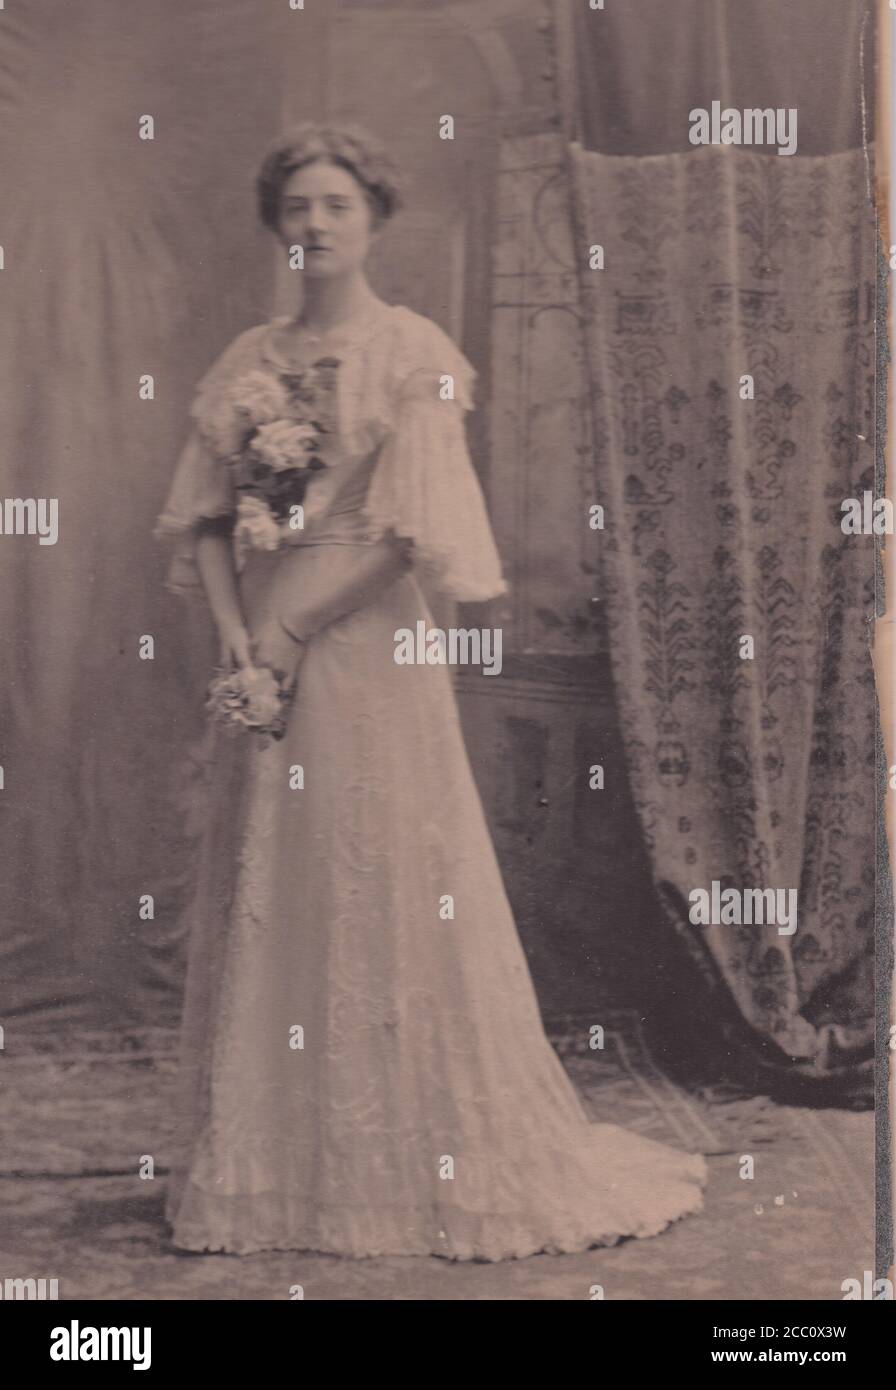 Vintage black and white photo of a bride in wedding dress and holding flowers 1900s Stock Photo